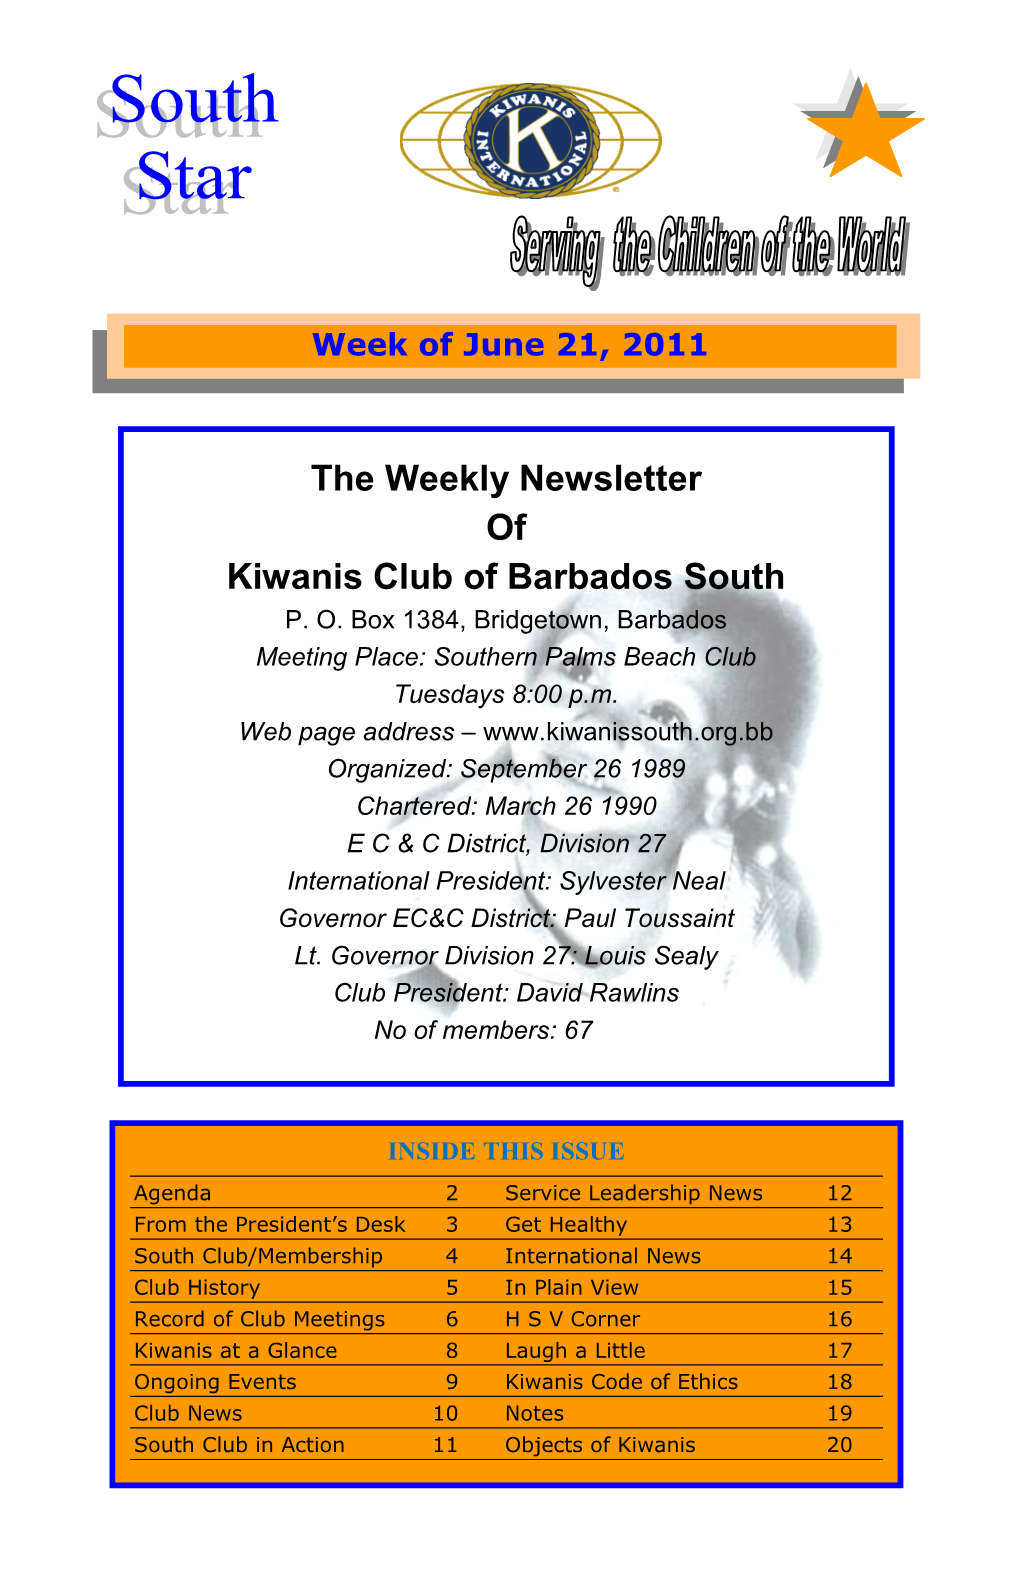 The Weekly Newsletter of Kiwanis Club of Barbados South P